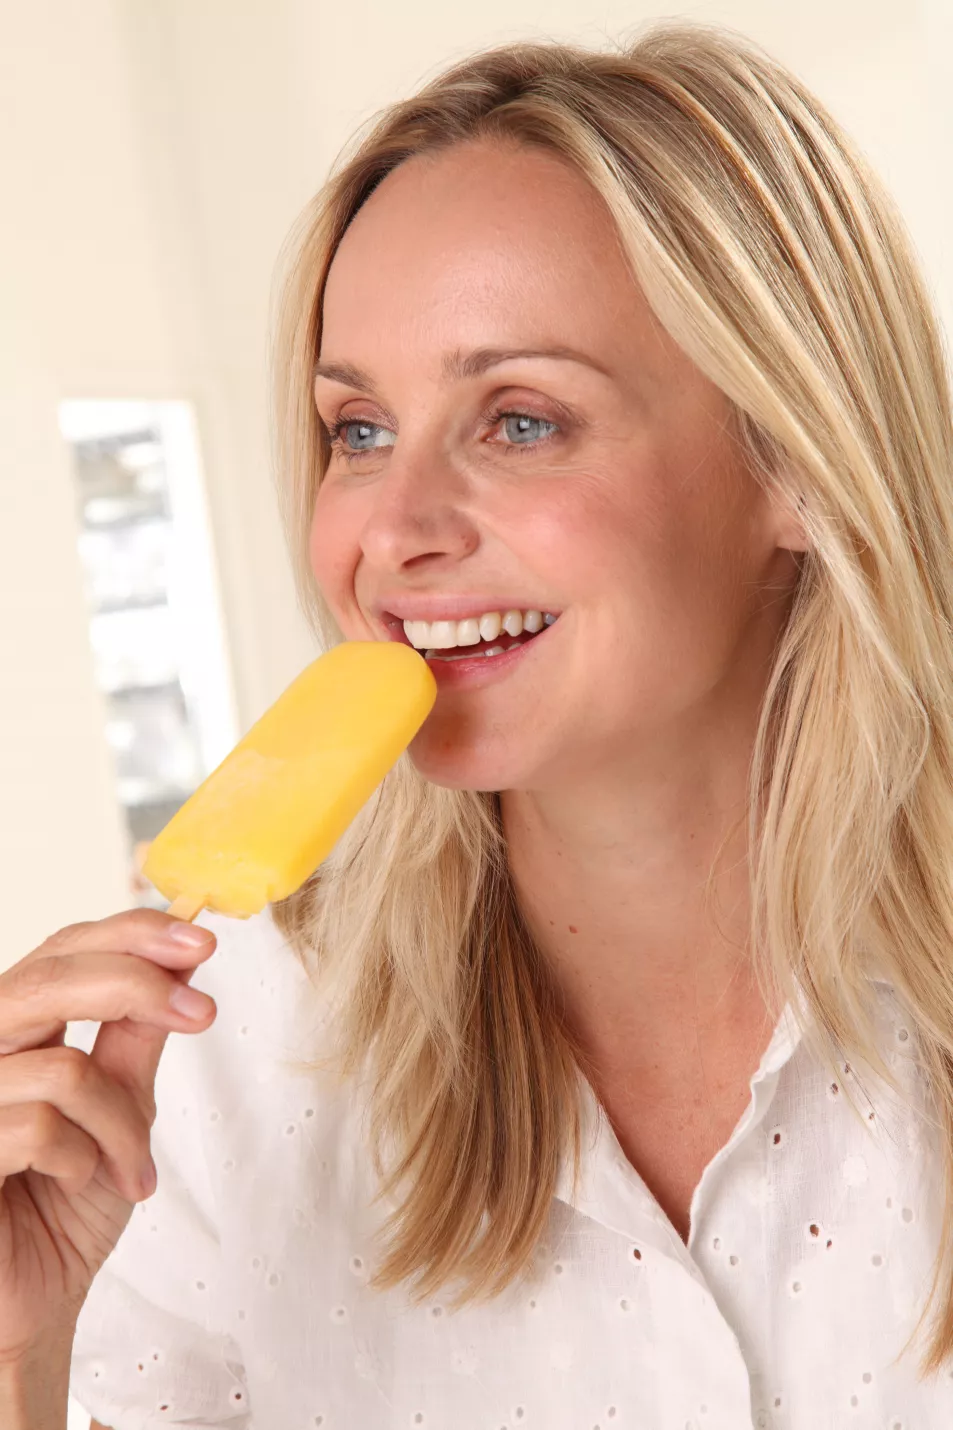 Woman eating an ice lolly